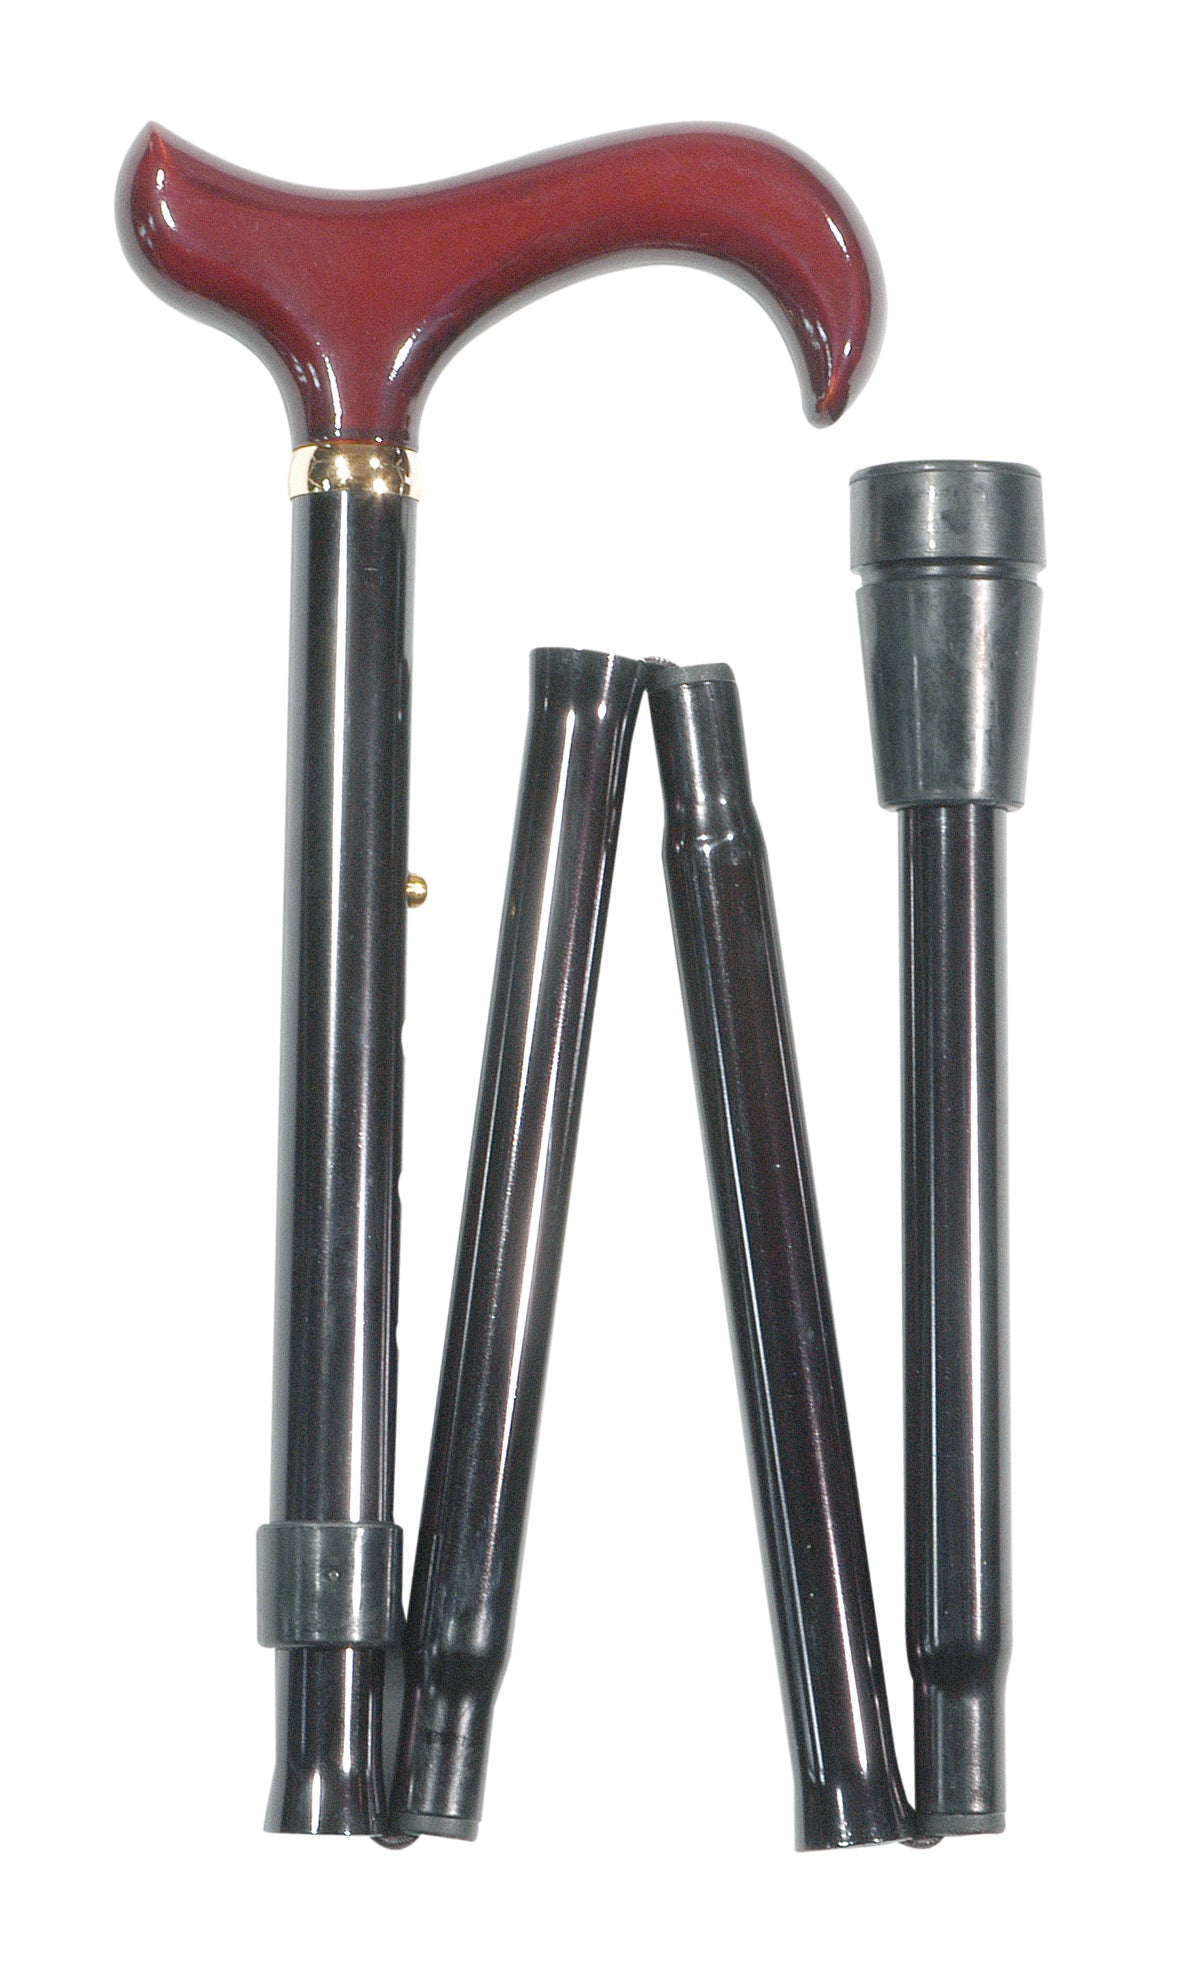 Classic Canes - Fashionable Folding Derby Canes